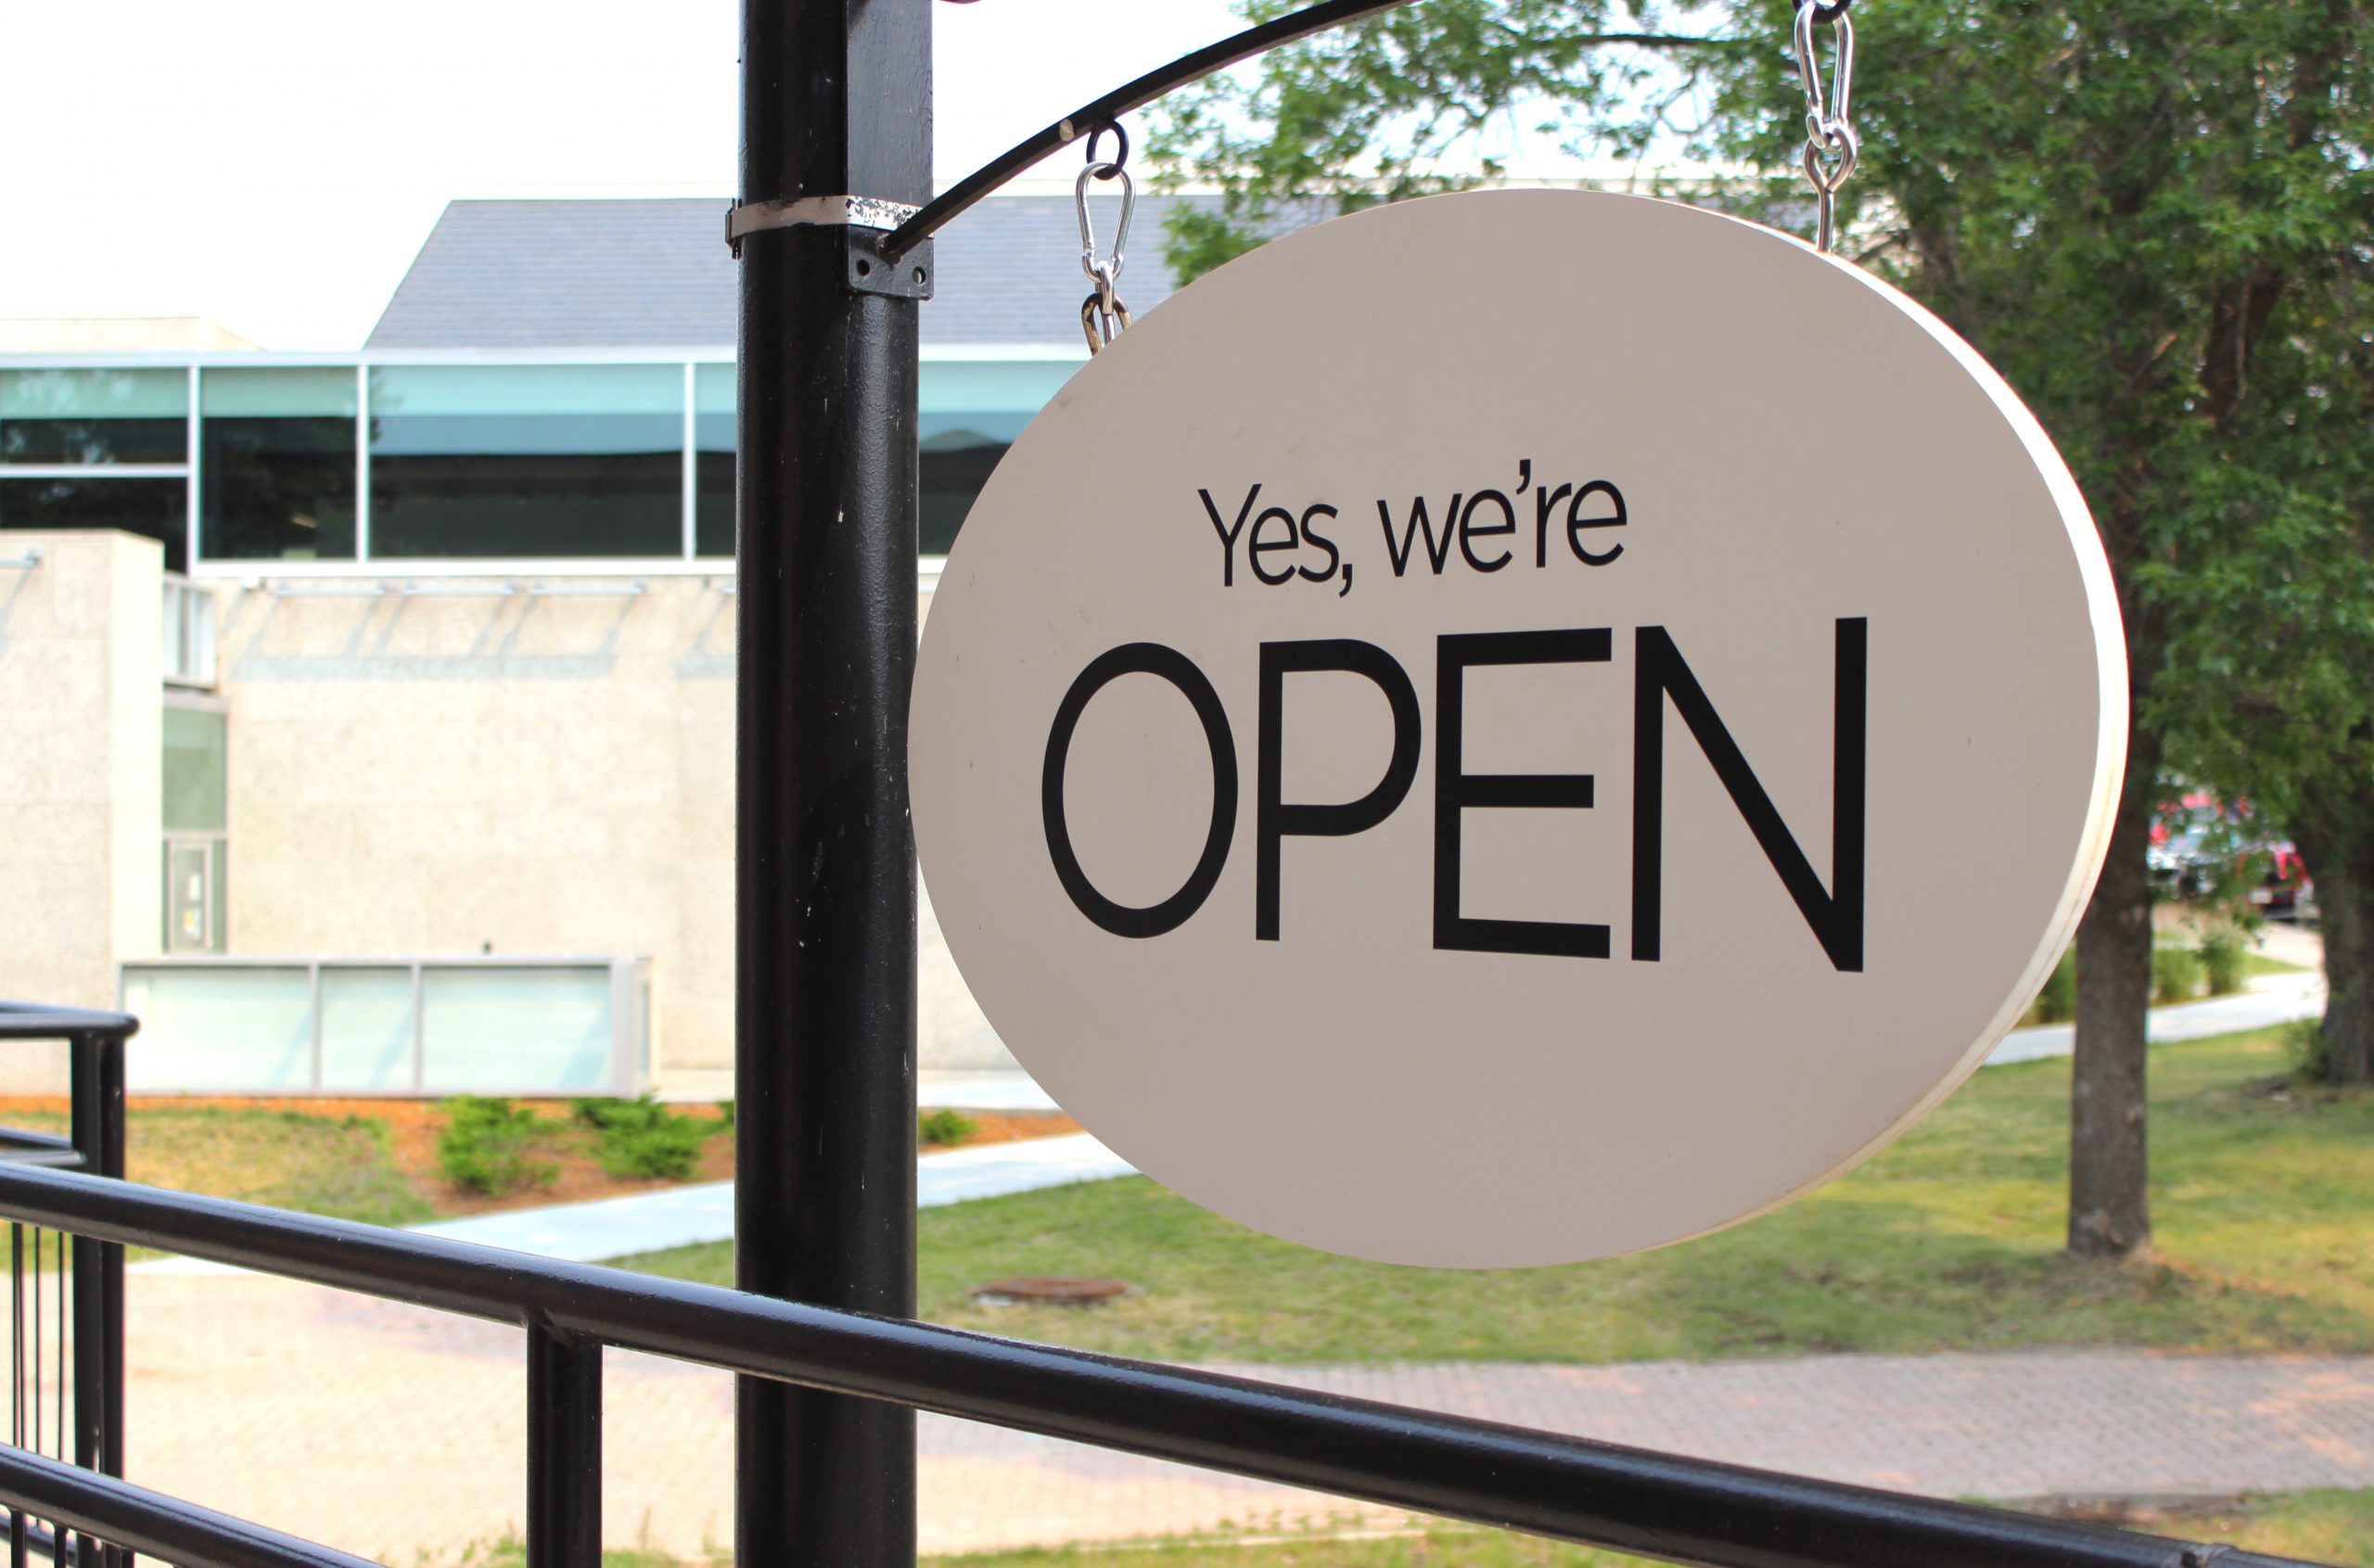 Photograph of a white sign reading "Yes, we're OPEN" in black text.